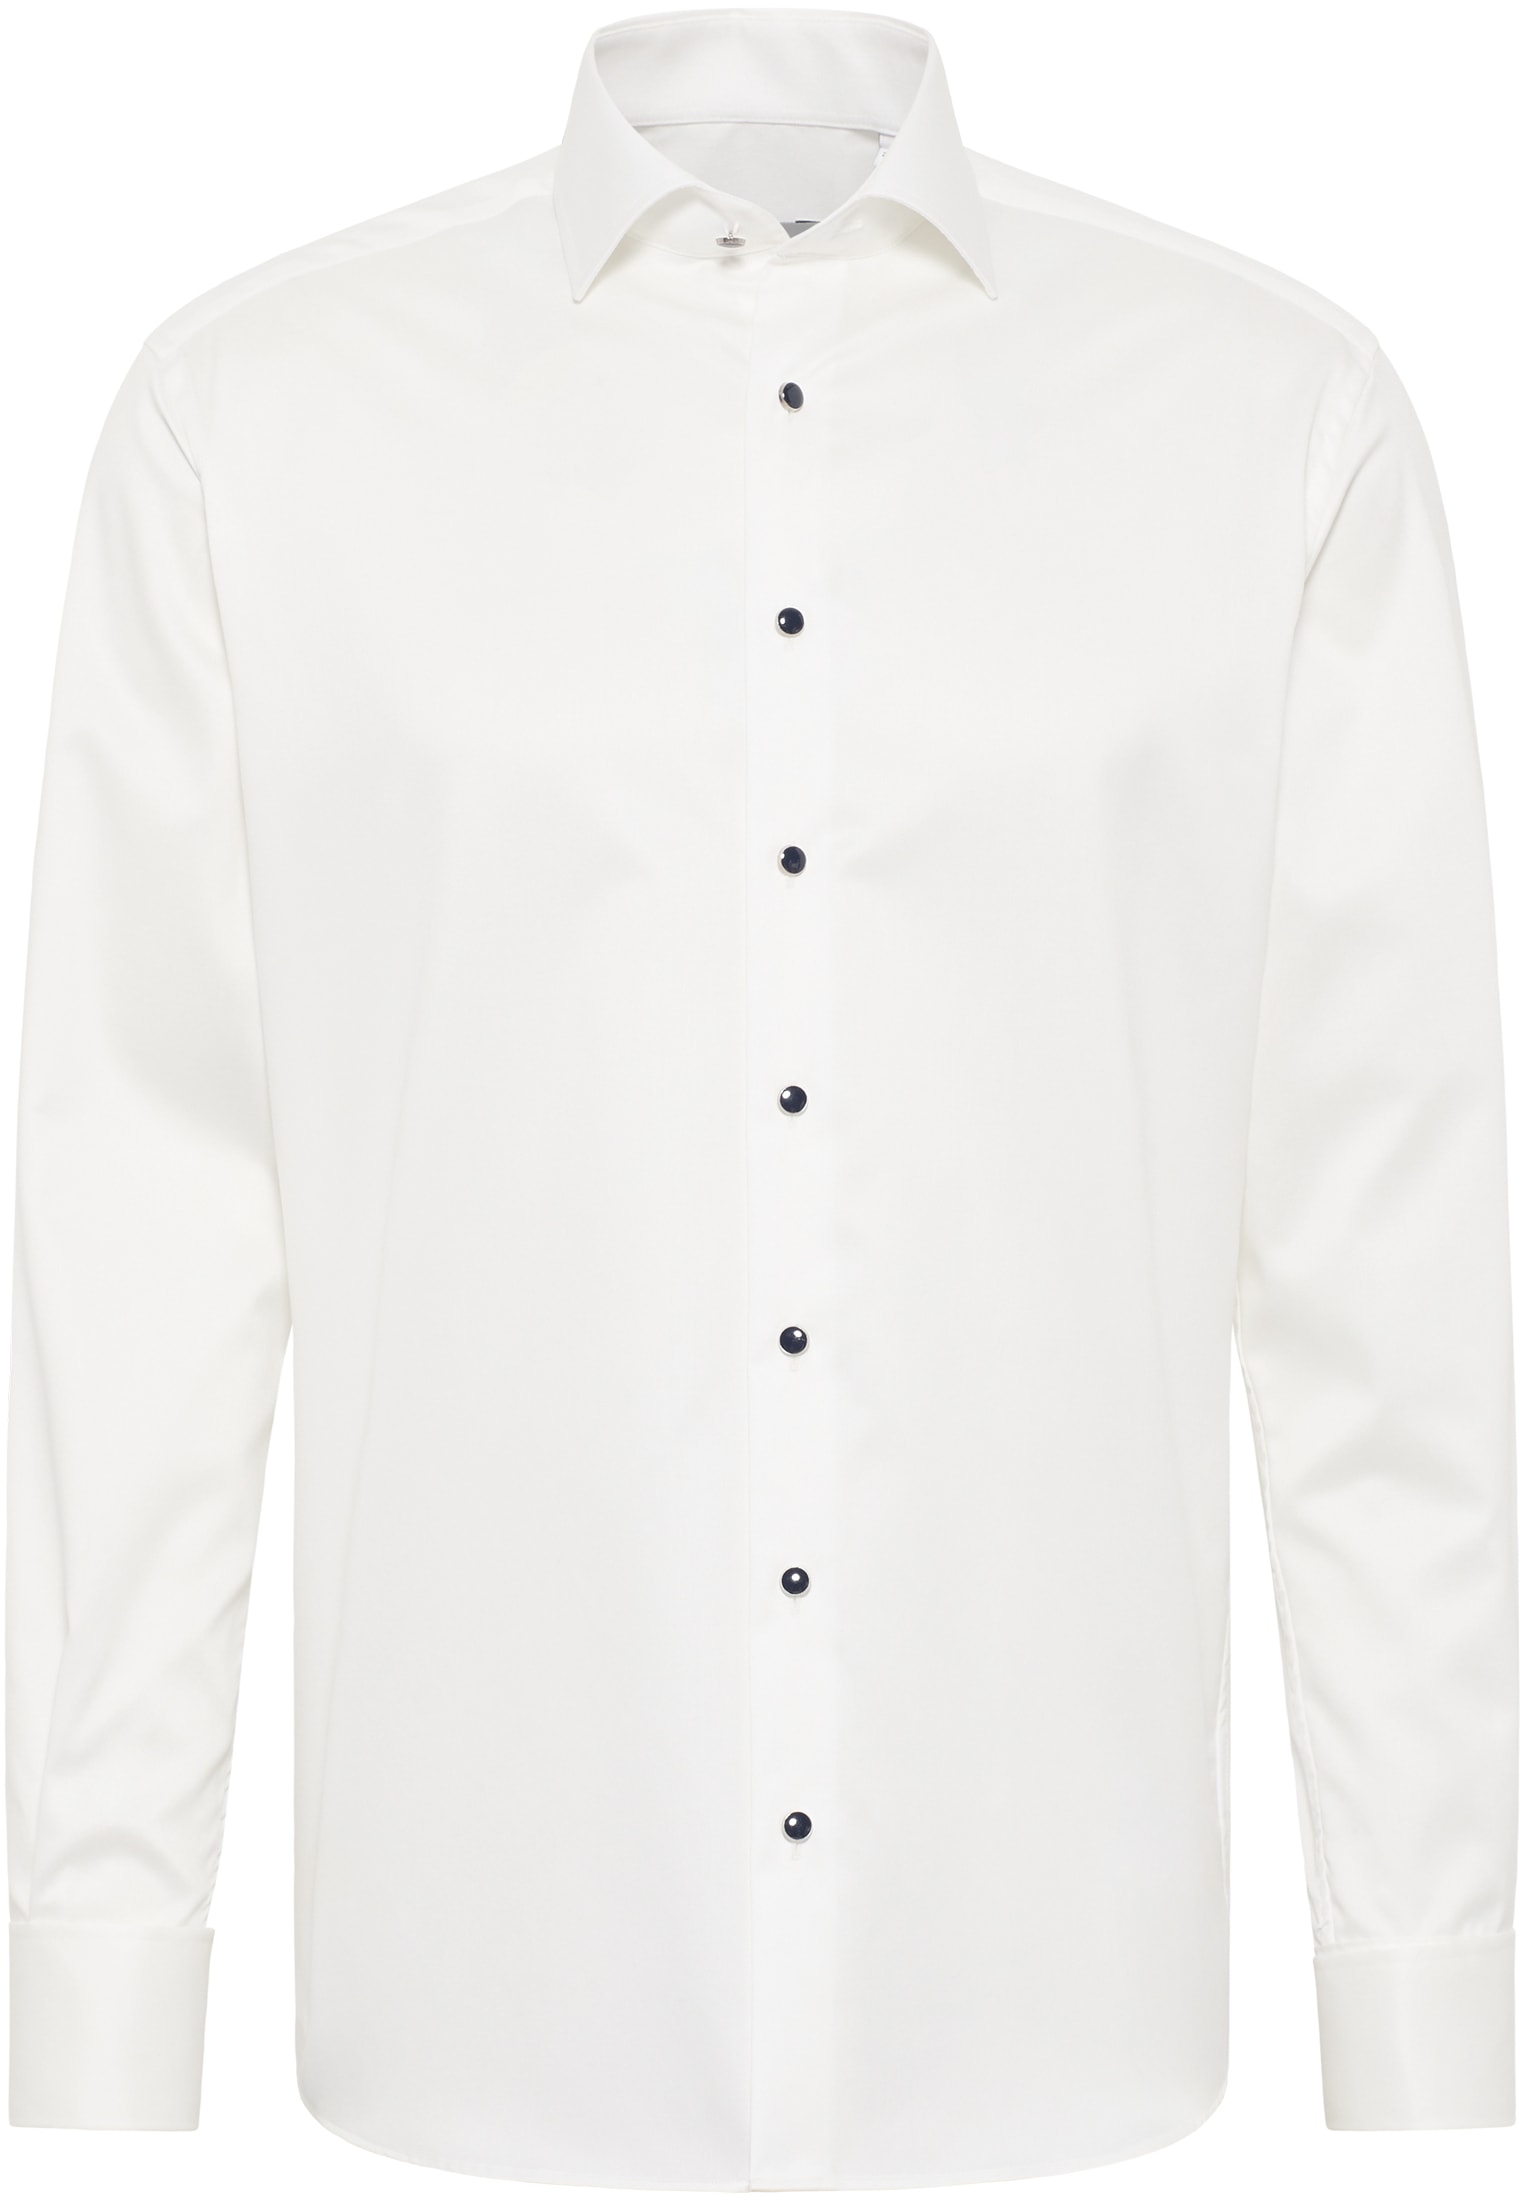 MODERN FIT Luxury Shirt in champagne plain